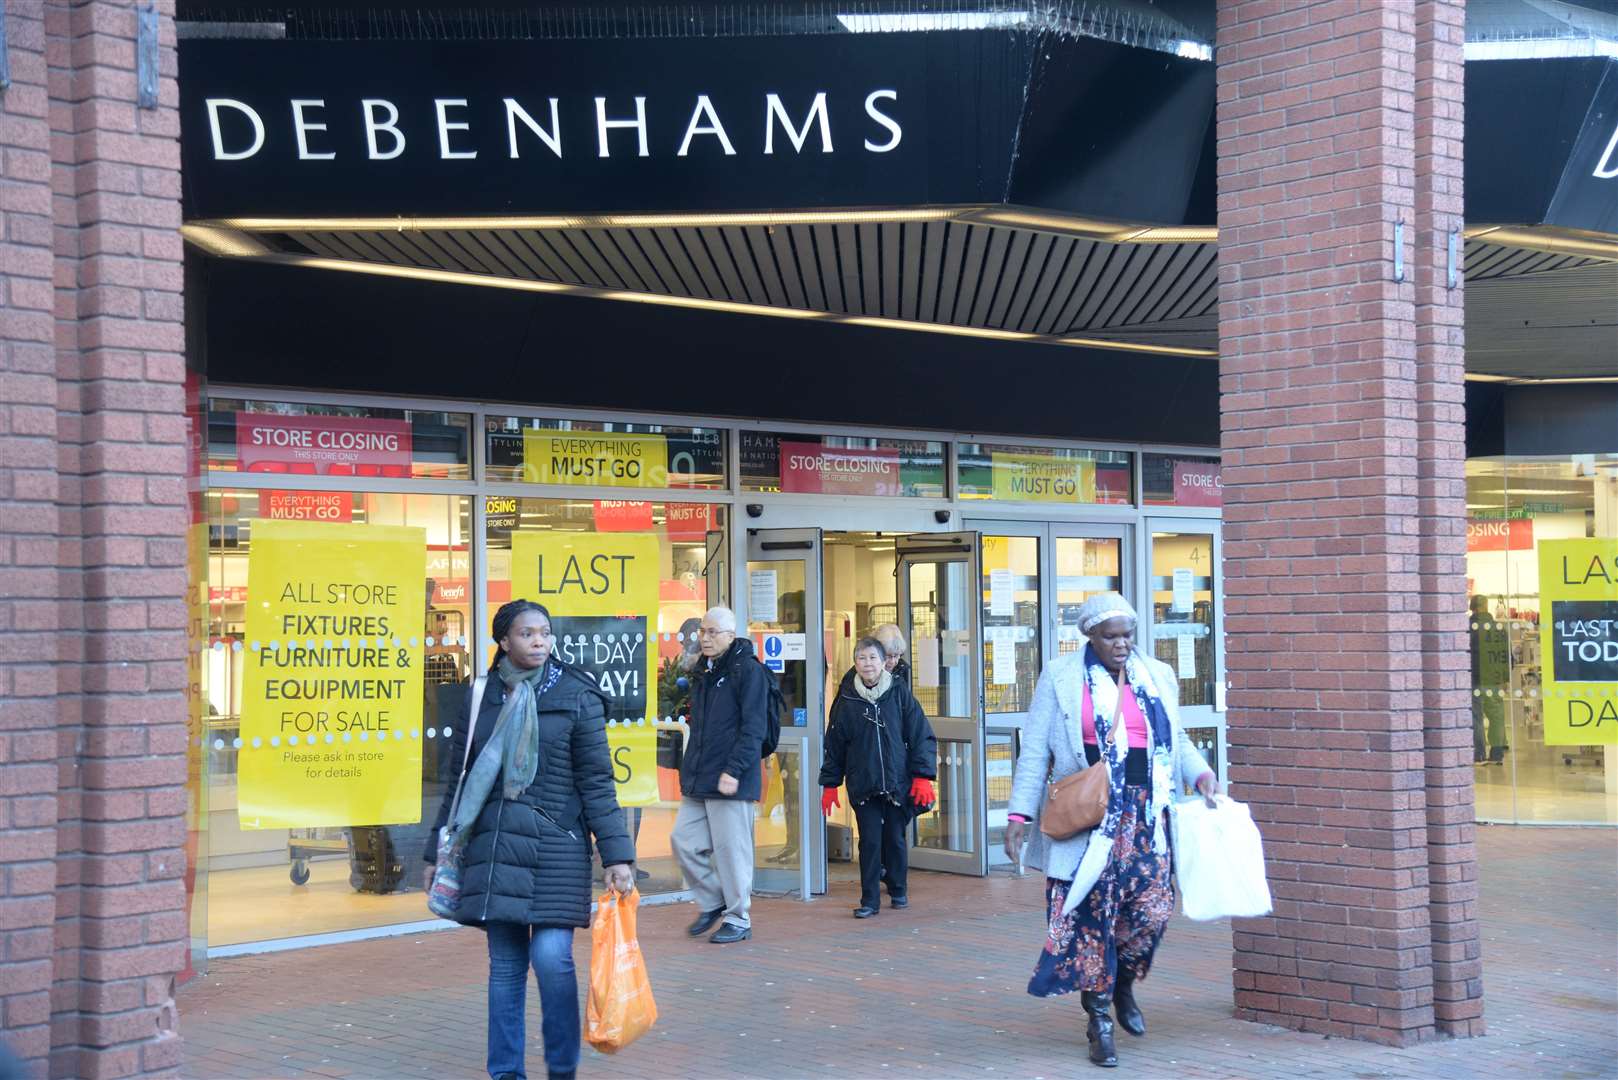 The last shoppers leave the Debenhams store in Chatham which closed in January last year